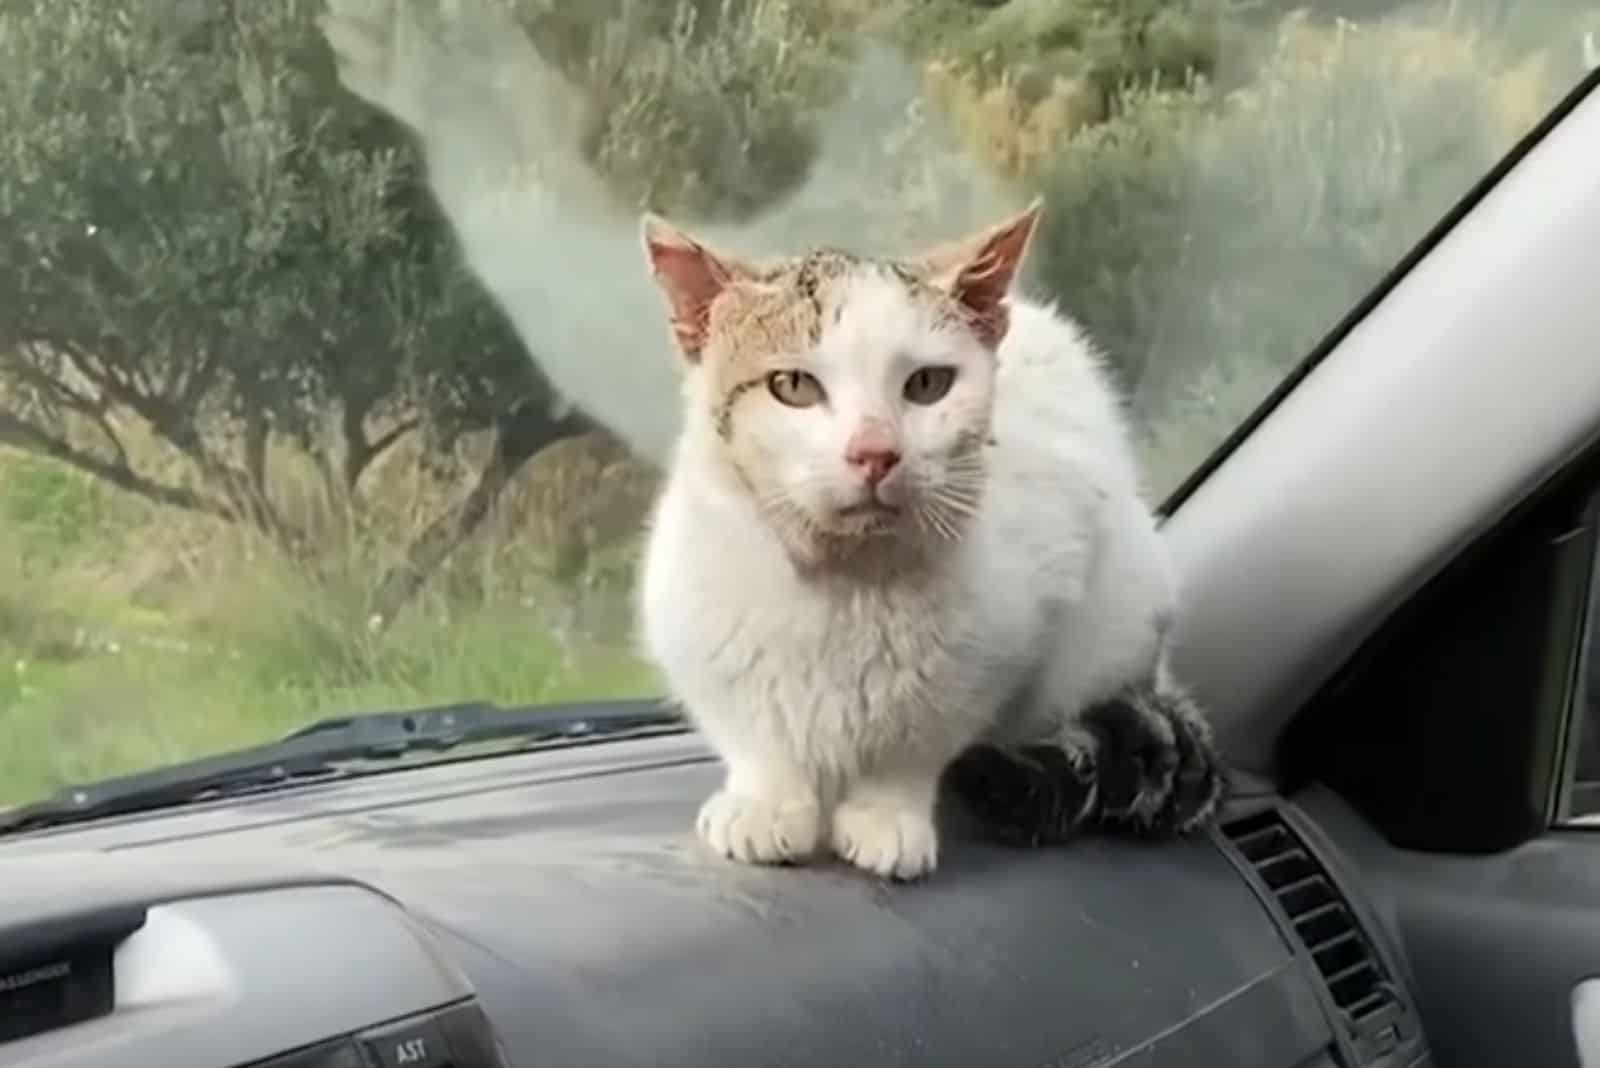 the cat is sitting in the car